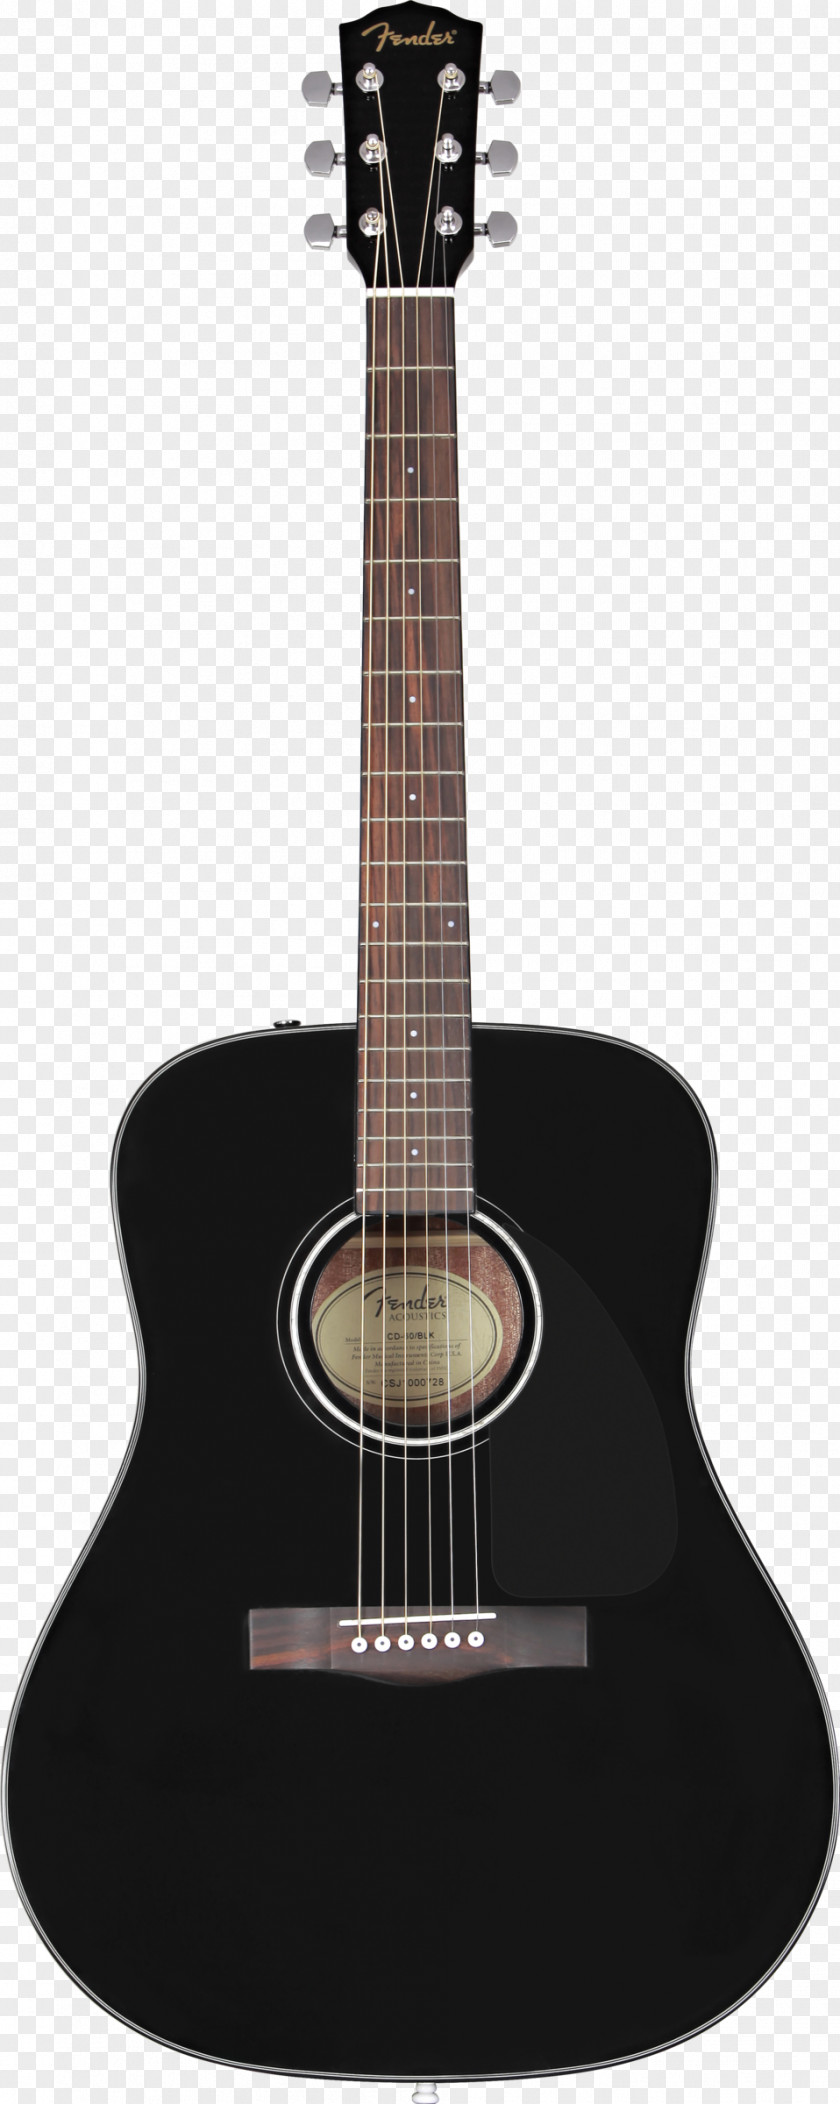 Acoustic Guitar Dreadnought Cutaway Acoustic-electric Classical PNG